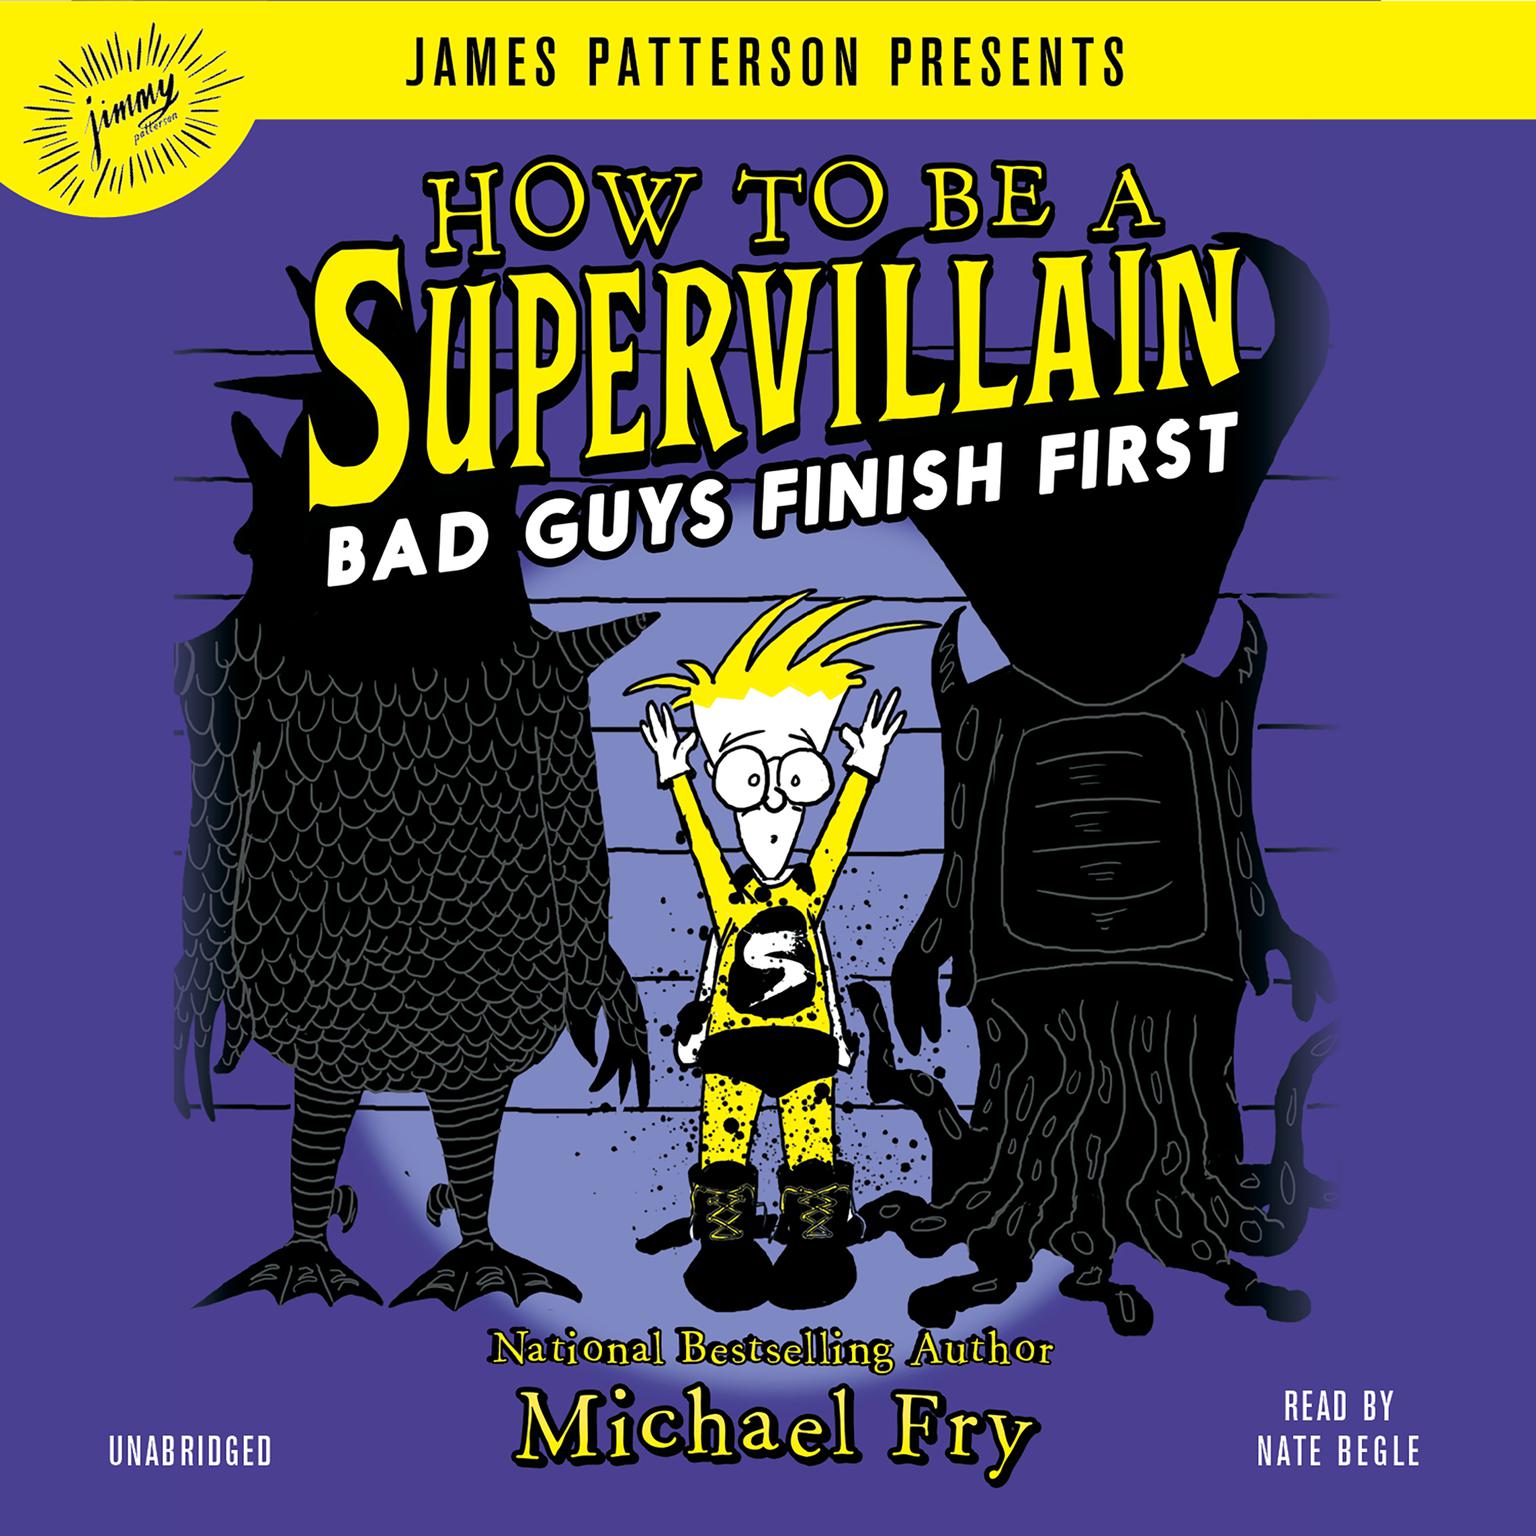 How to Be a Supervillain: Bad Guys Finish First Audiobook, by Michael Fry